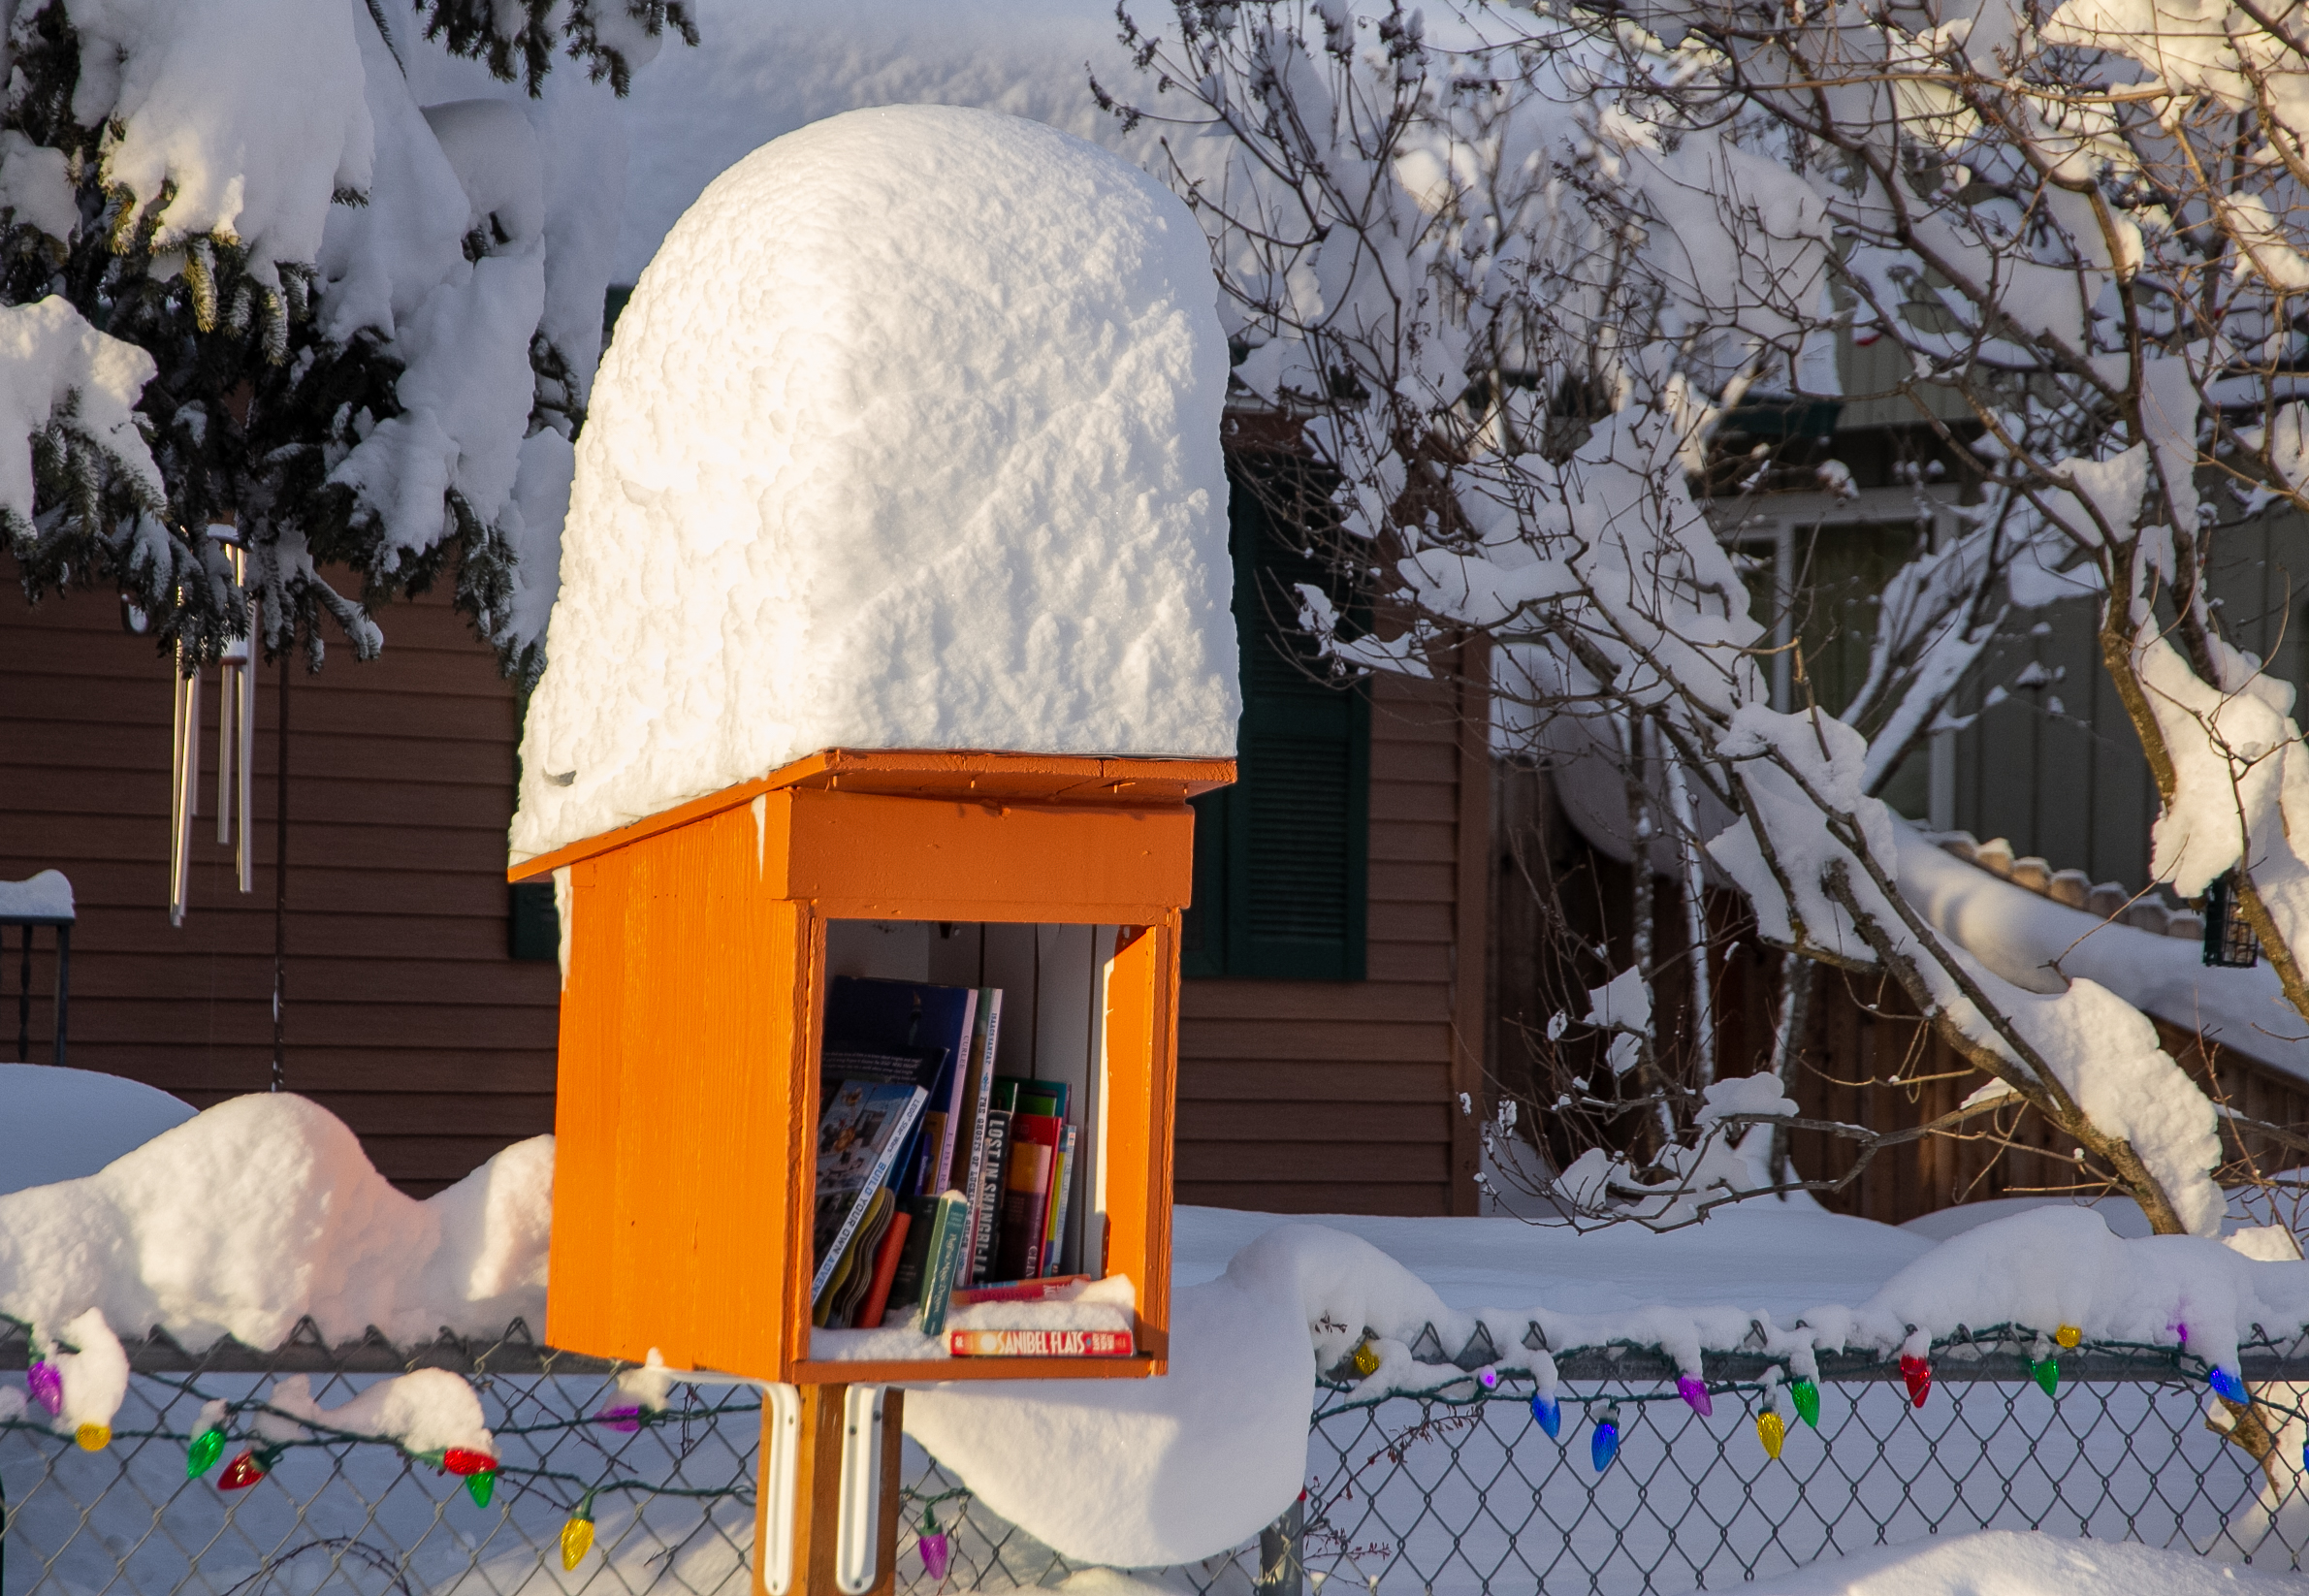 A small neighborhood book exchange with a thick pillow of snow on top.